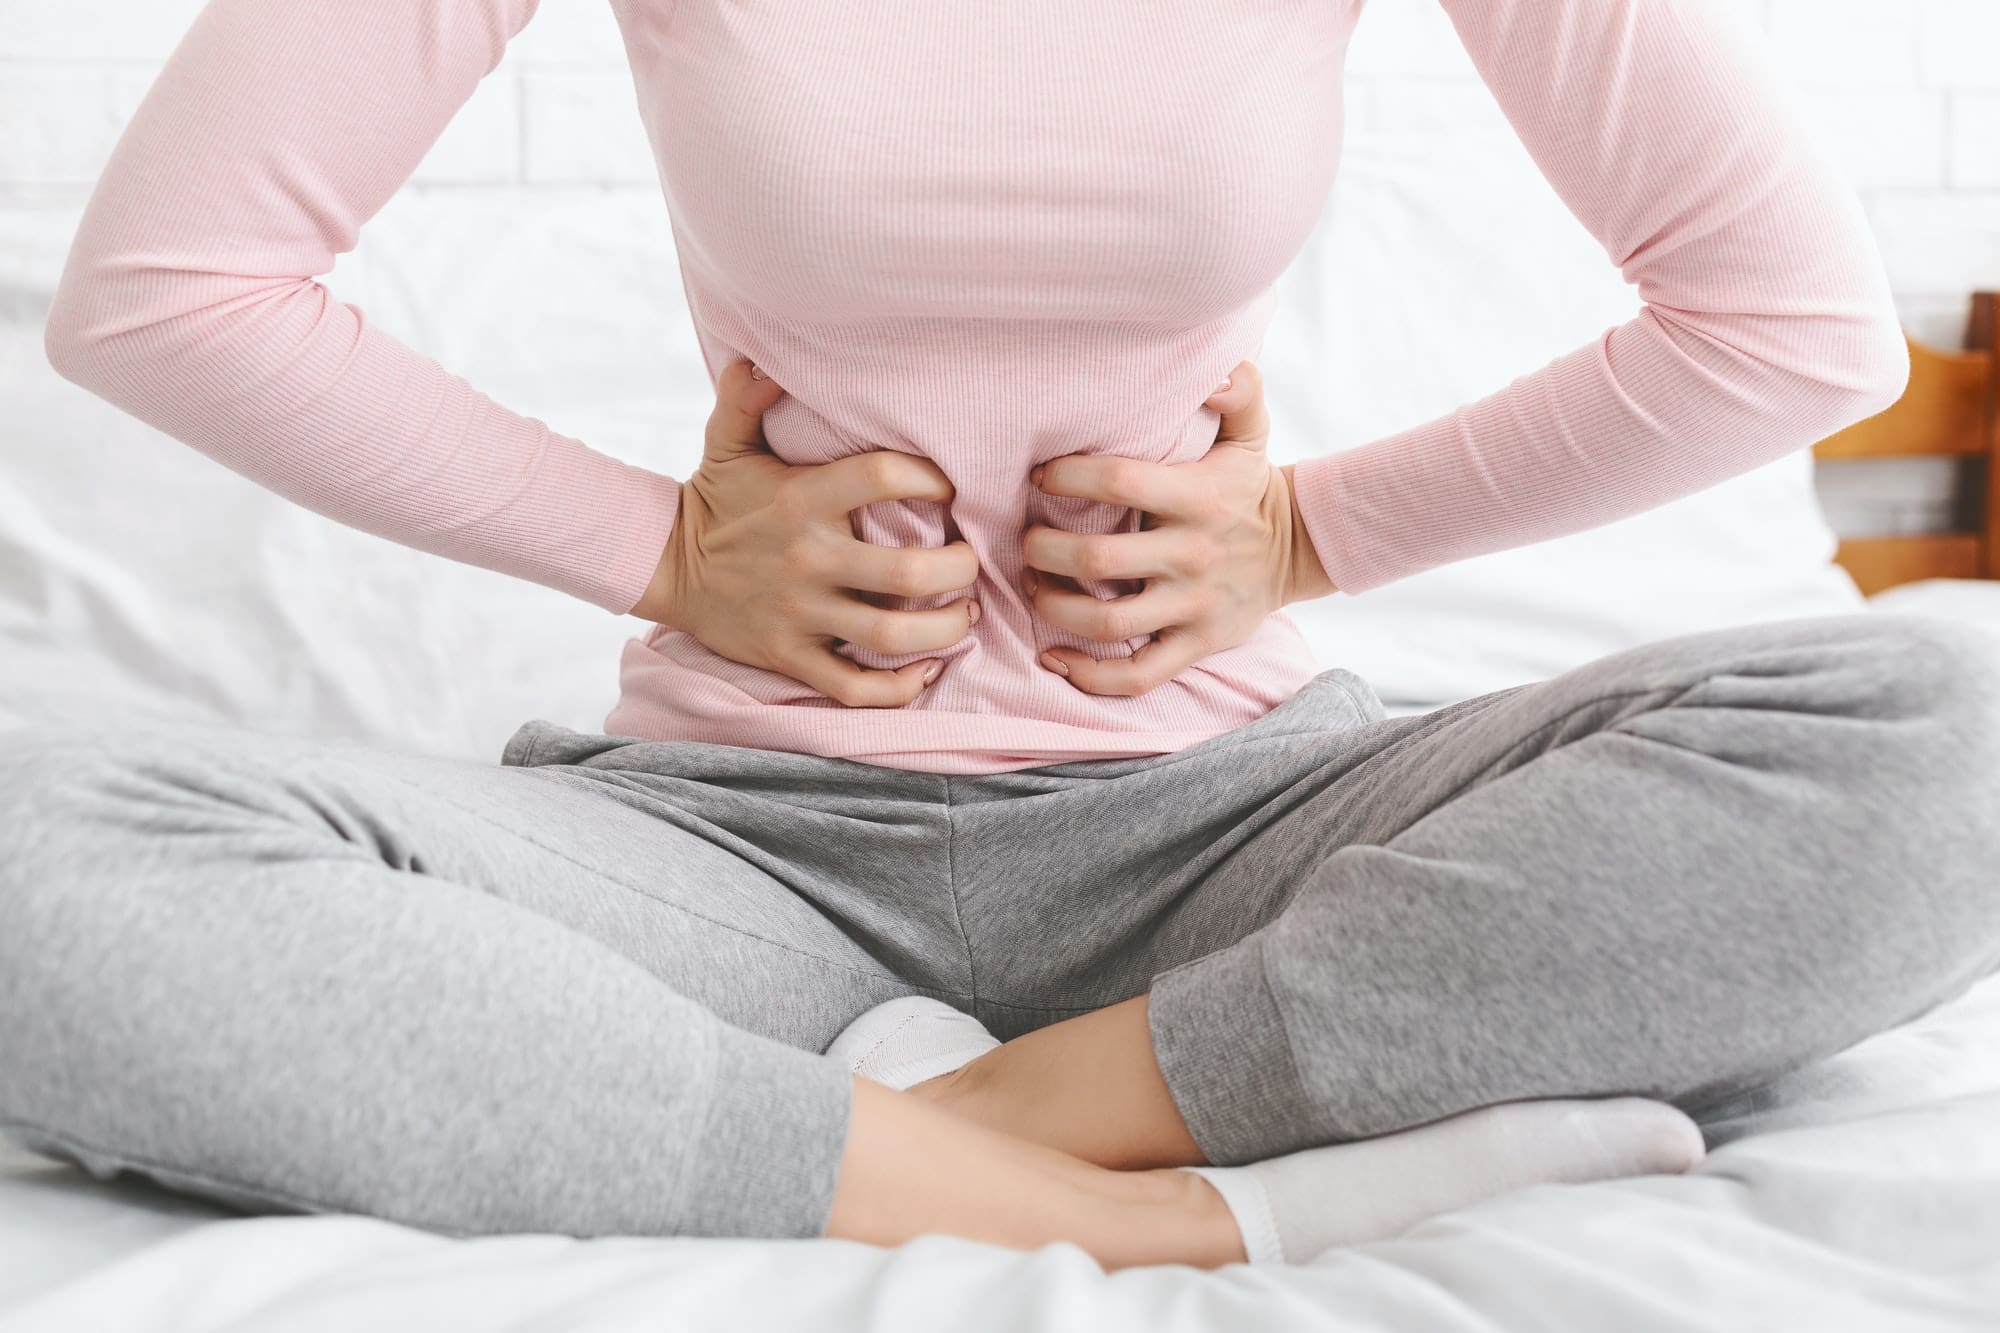 Treating Painful Periods with Chinese Medicine